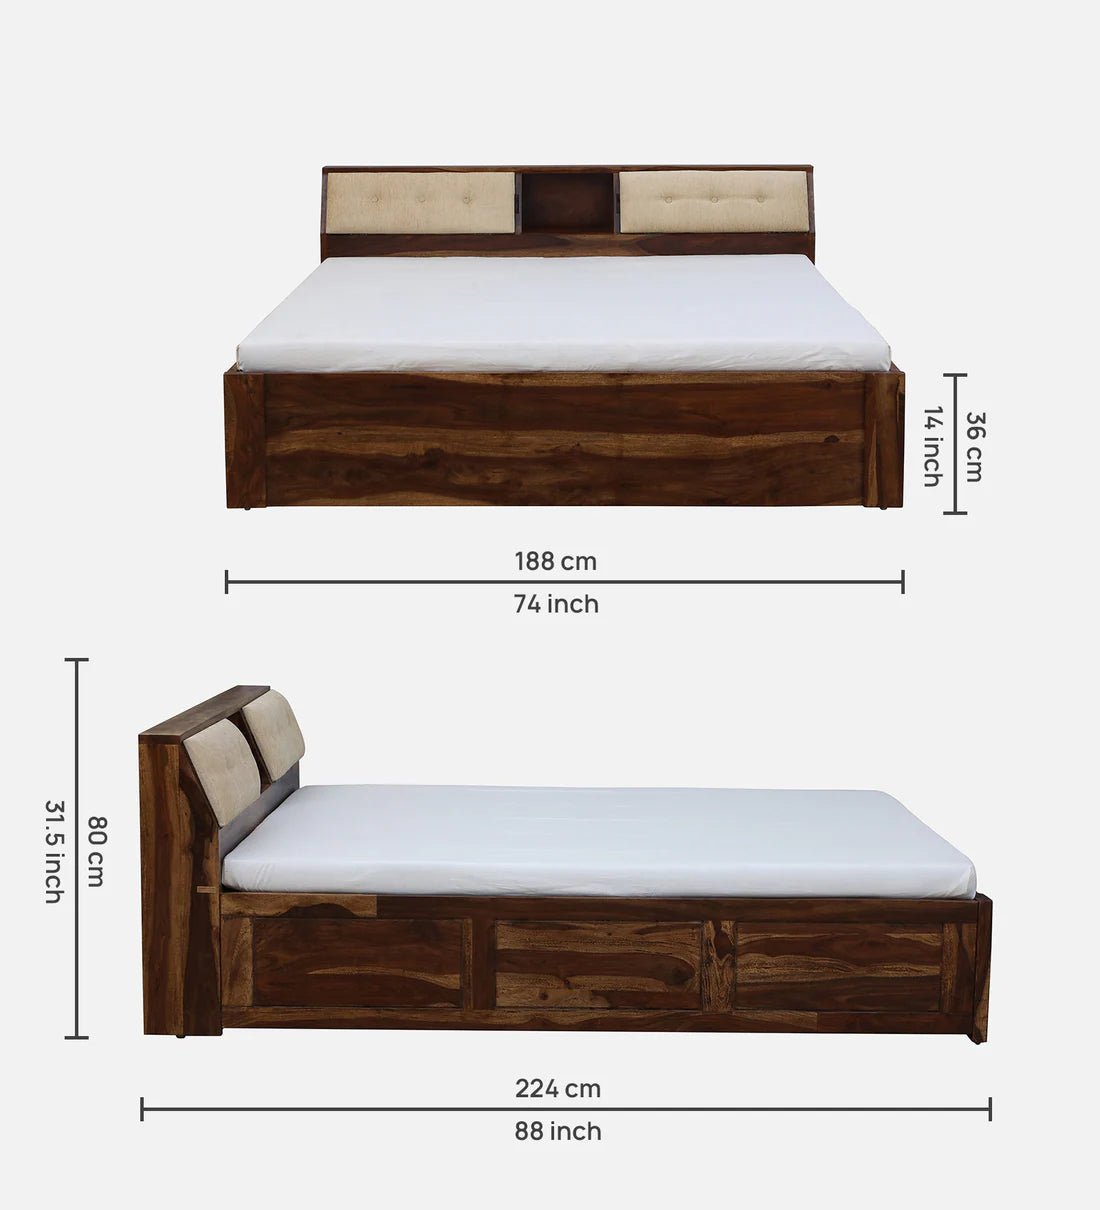 Sheesham Wood King Size Bed In Scratch Resistant Rustic Teak Finish With Box Storage